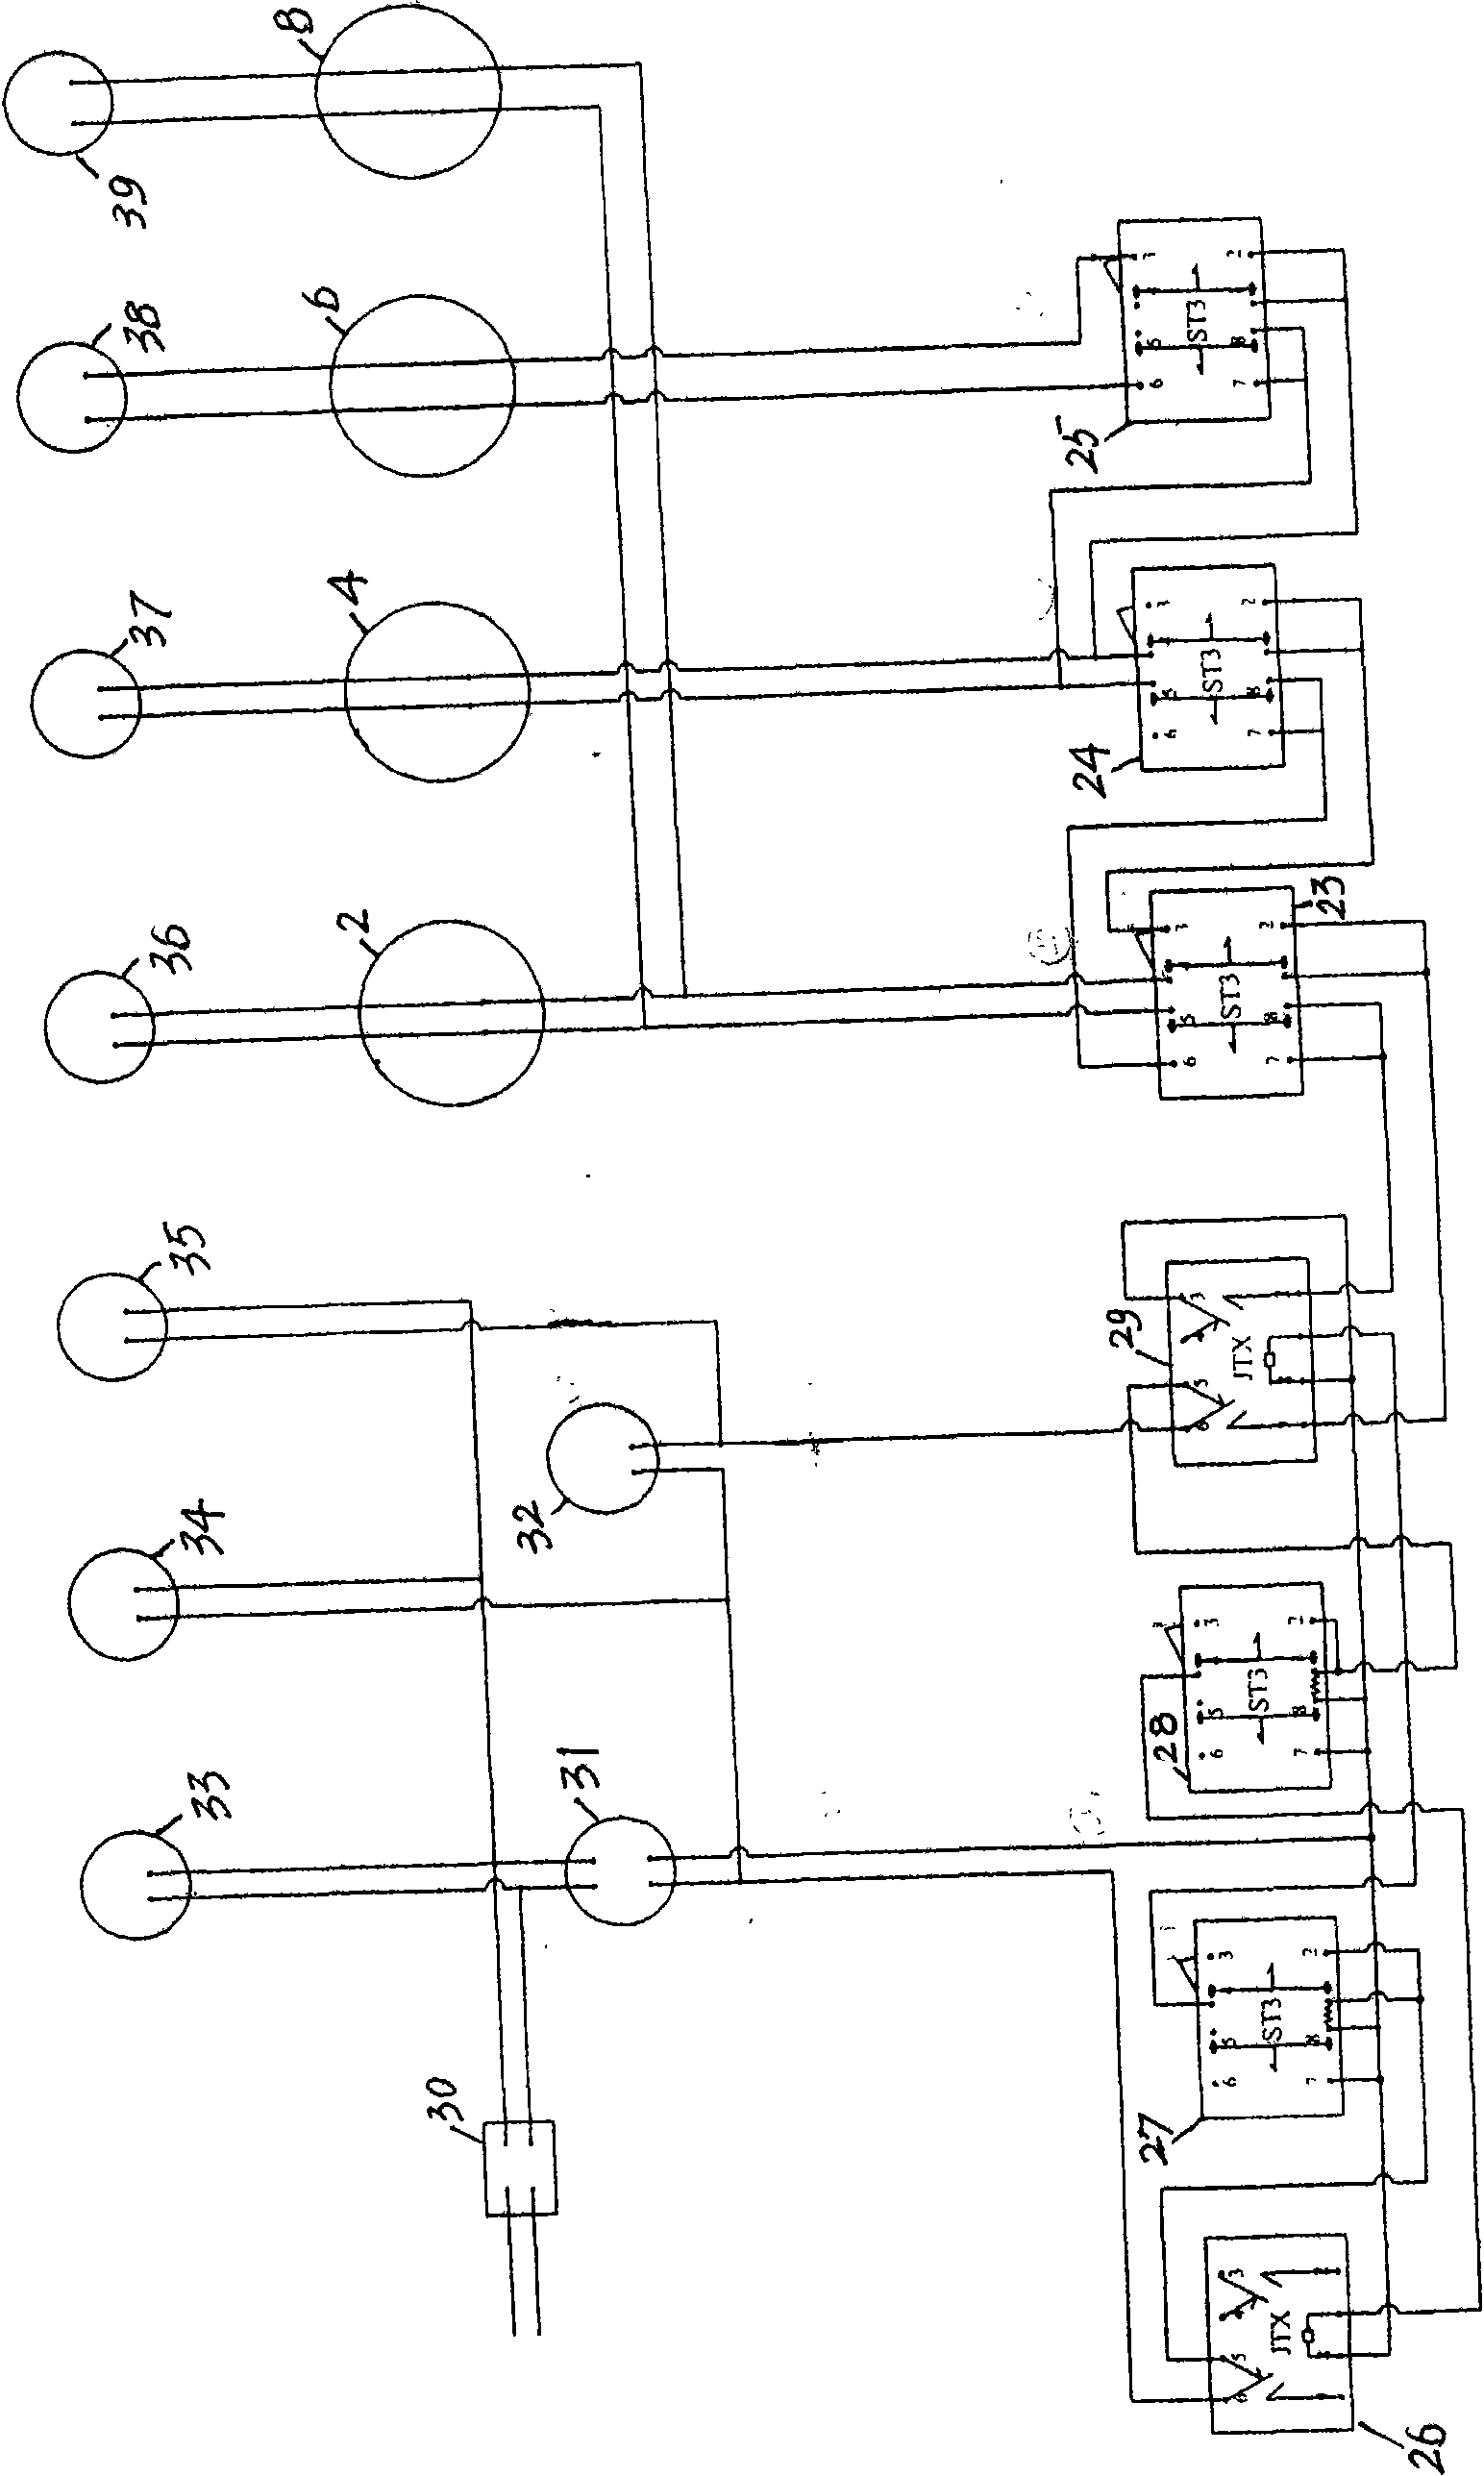 Boiler with automatic watering device